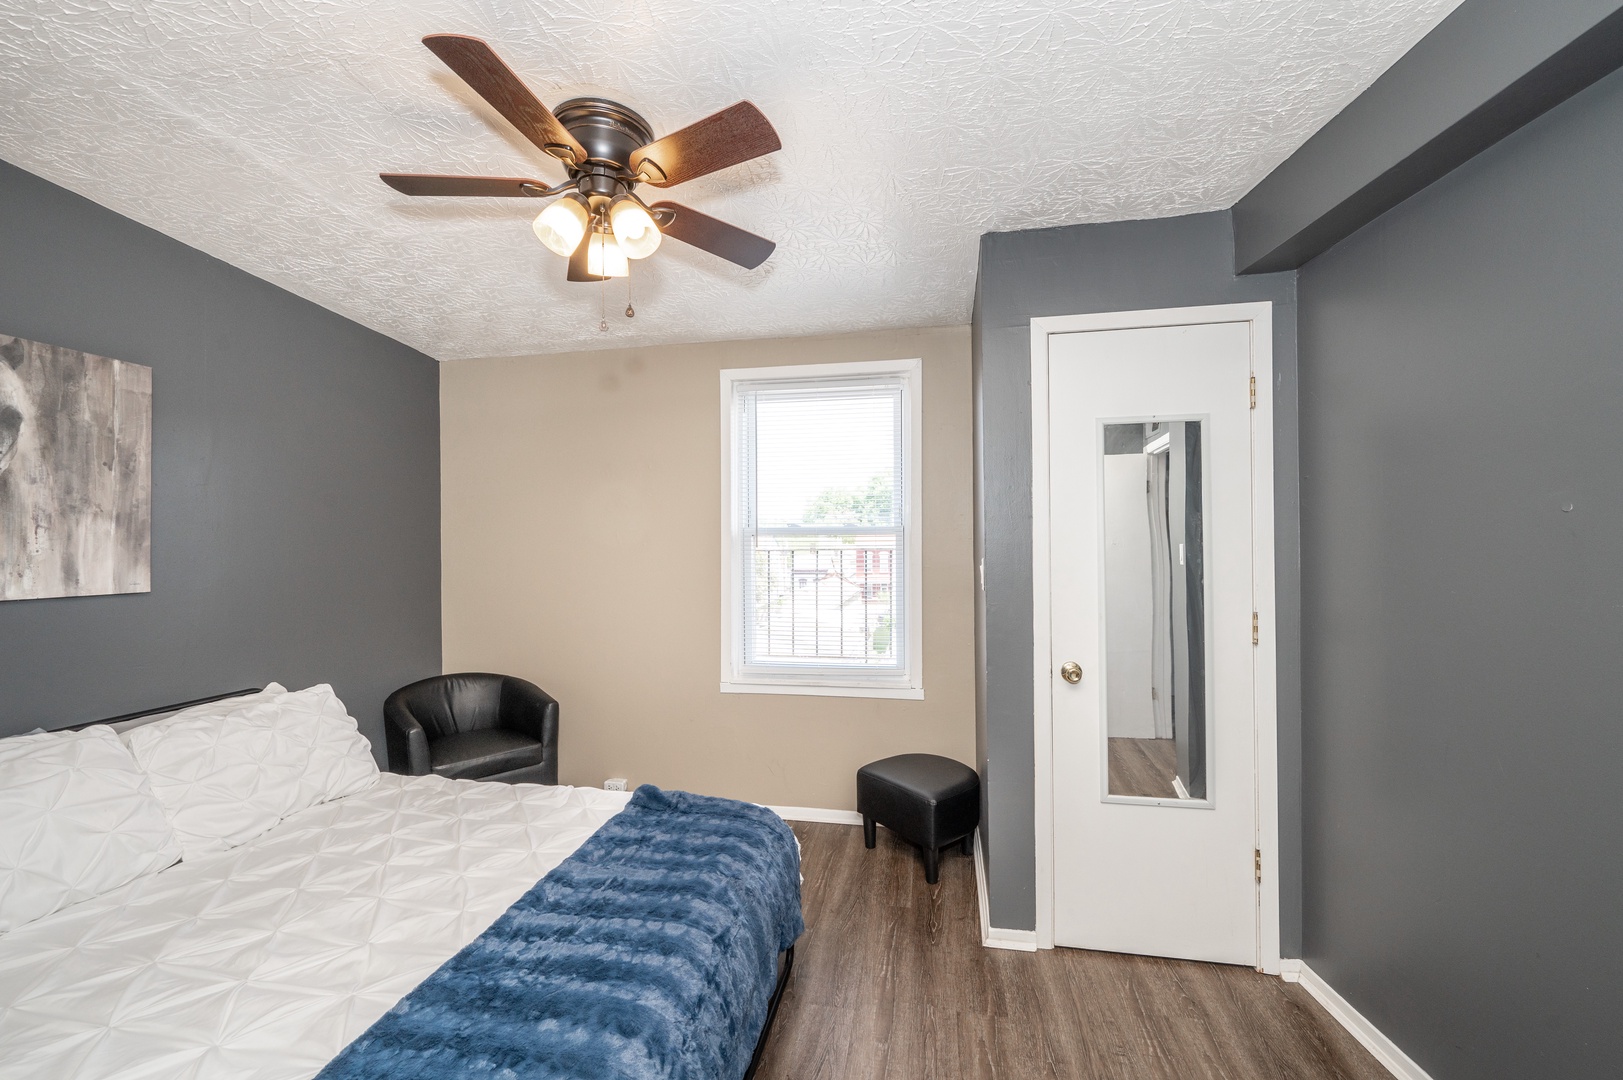 The spacious primary bedroom offers a queen bed & ceiling fan